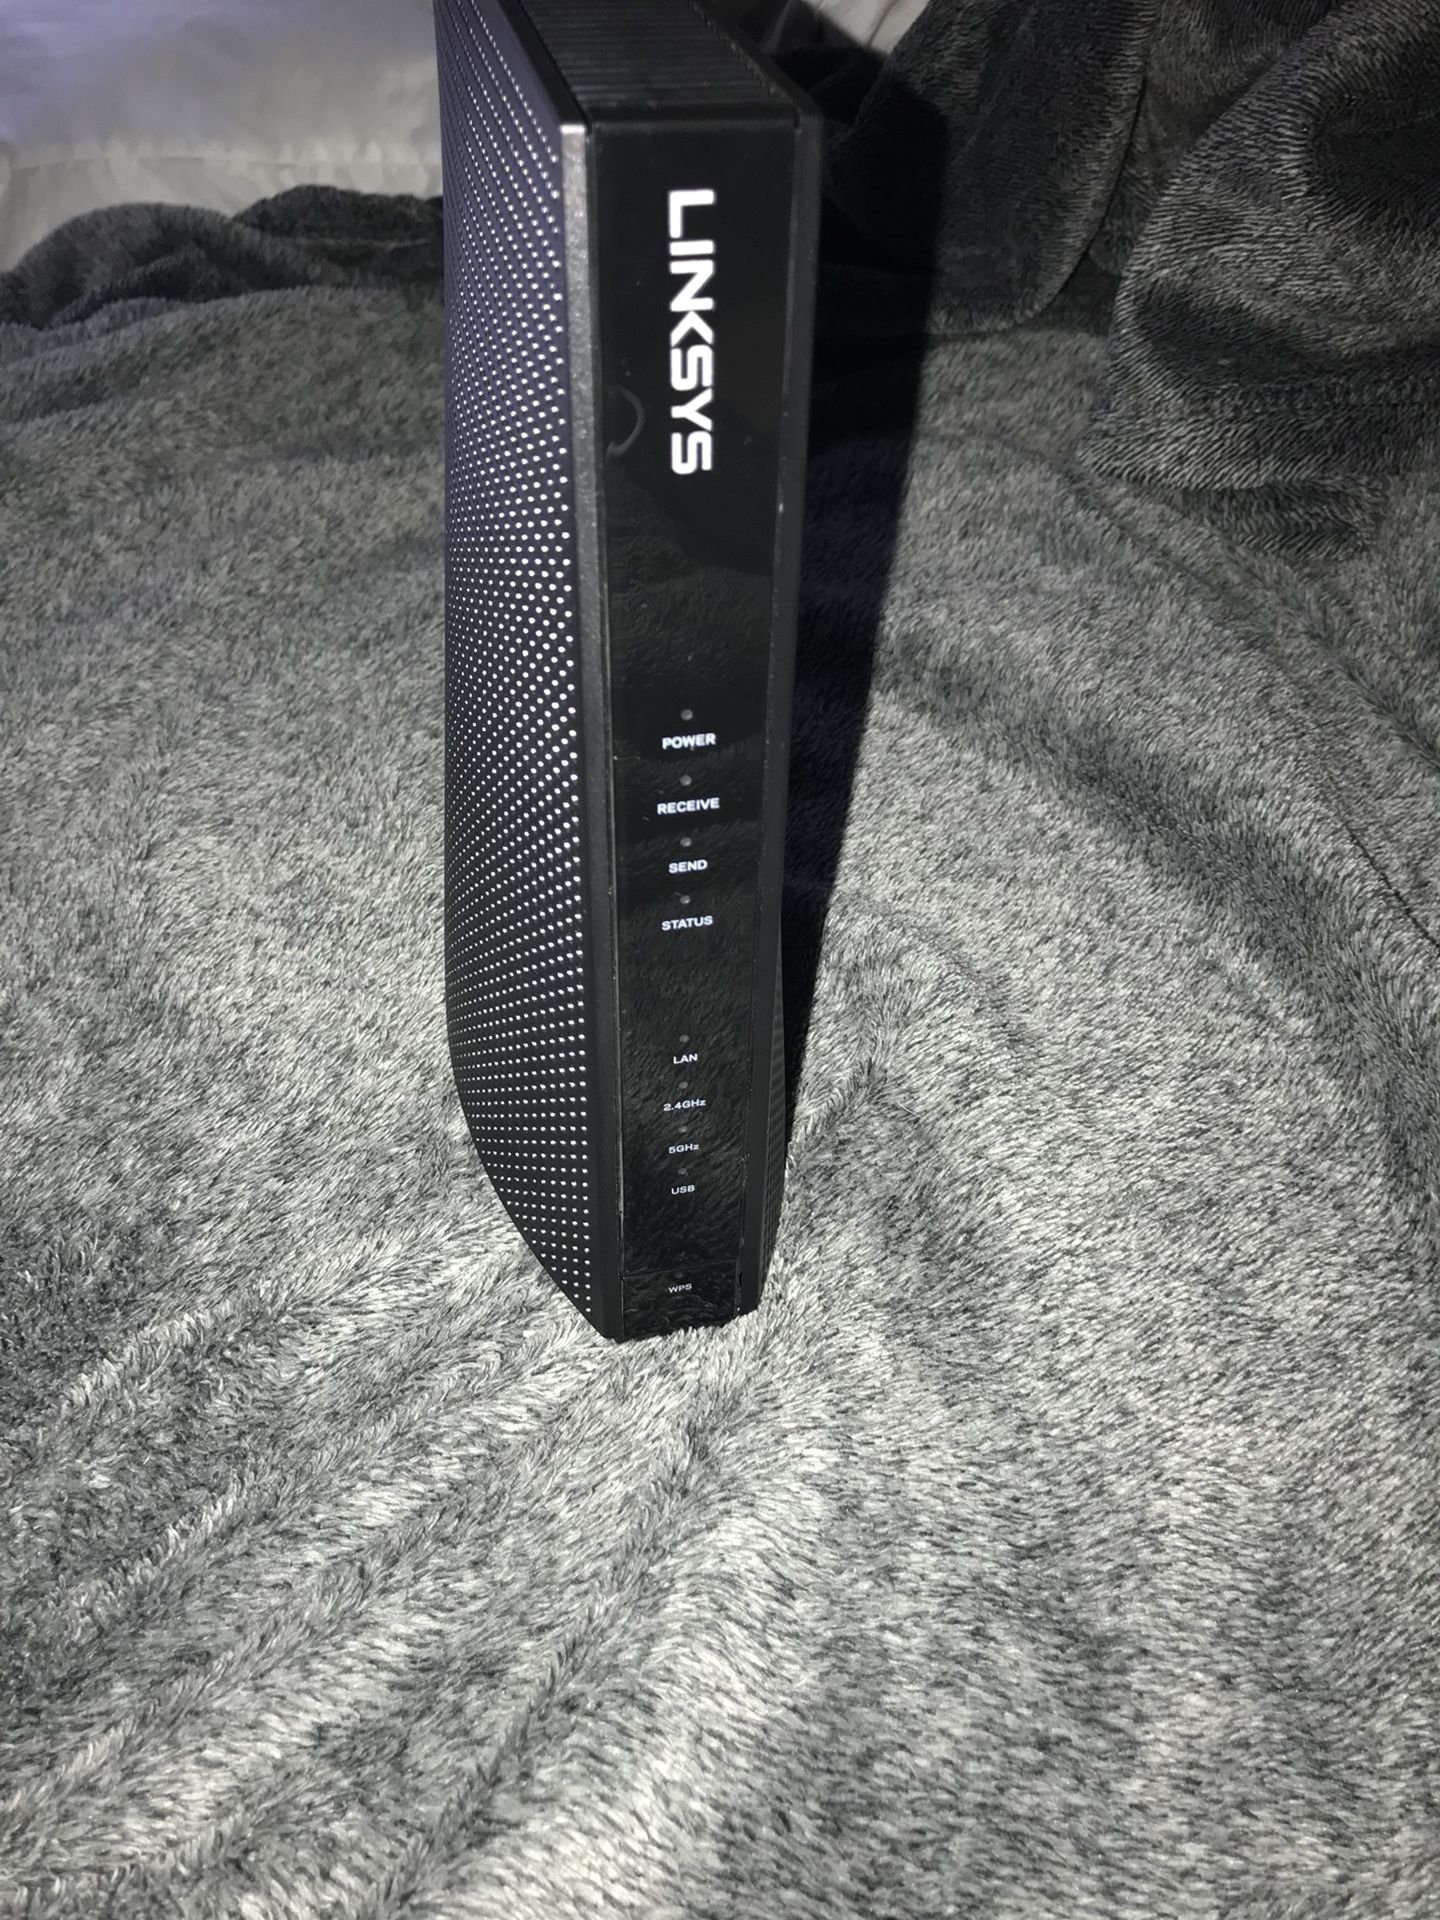 Linksys Cable Router and Modem combo one device